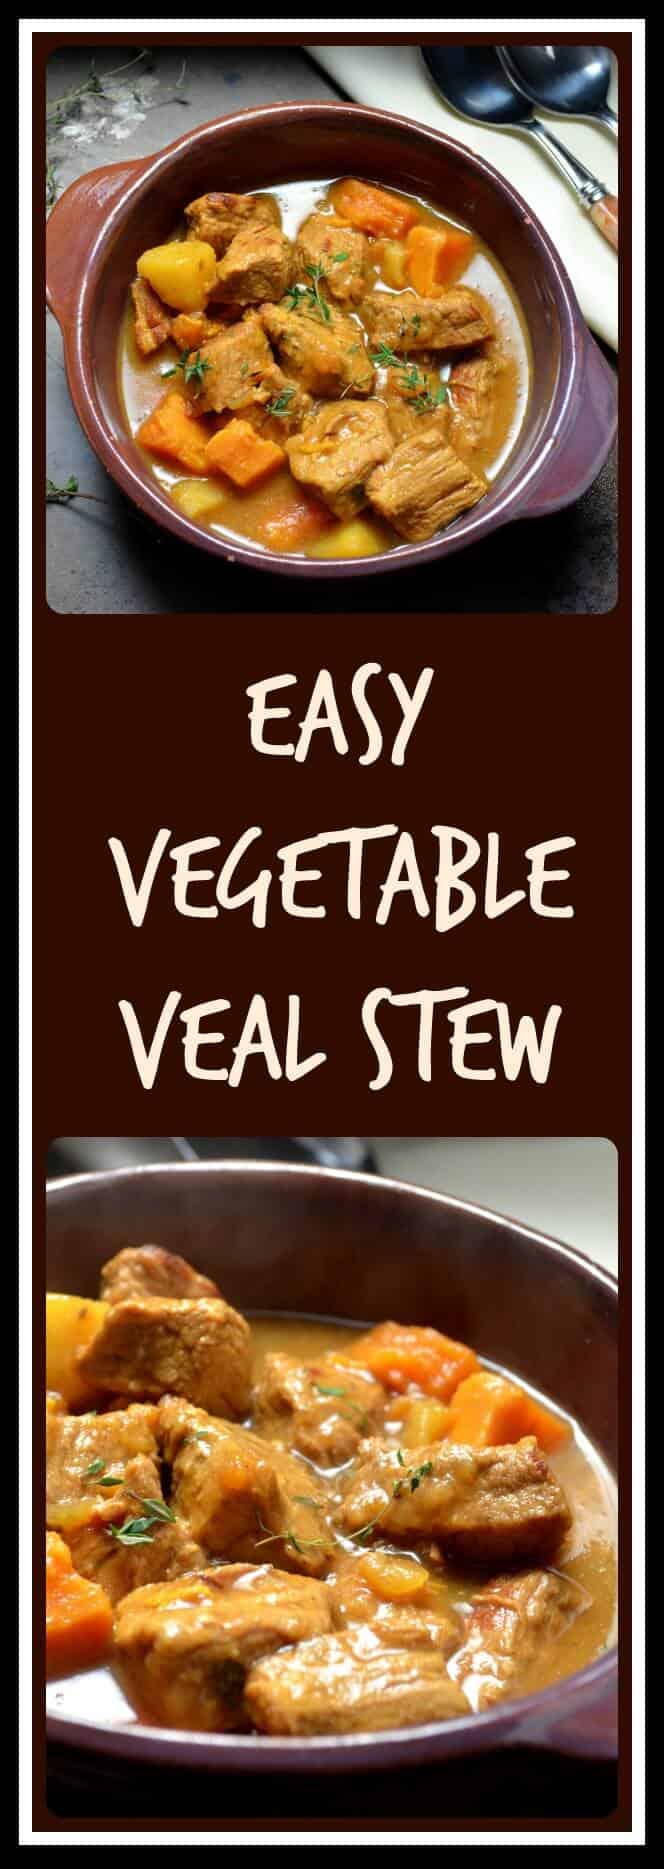 A bowl of Easy Vegetable Veal Stew.